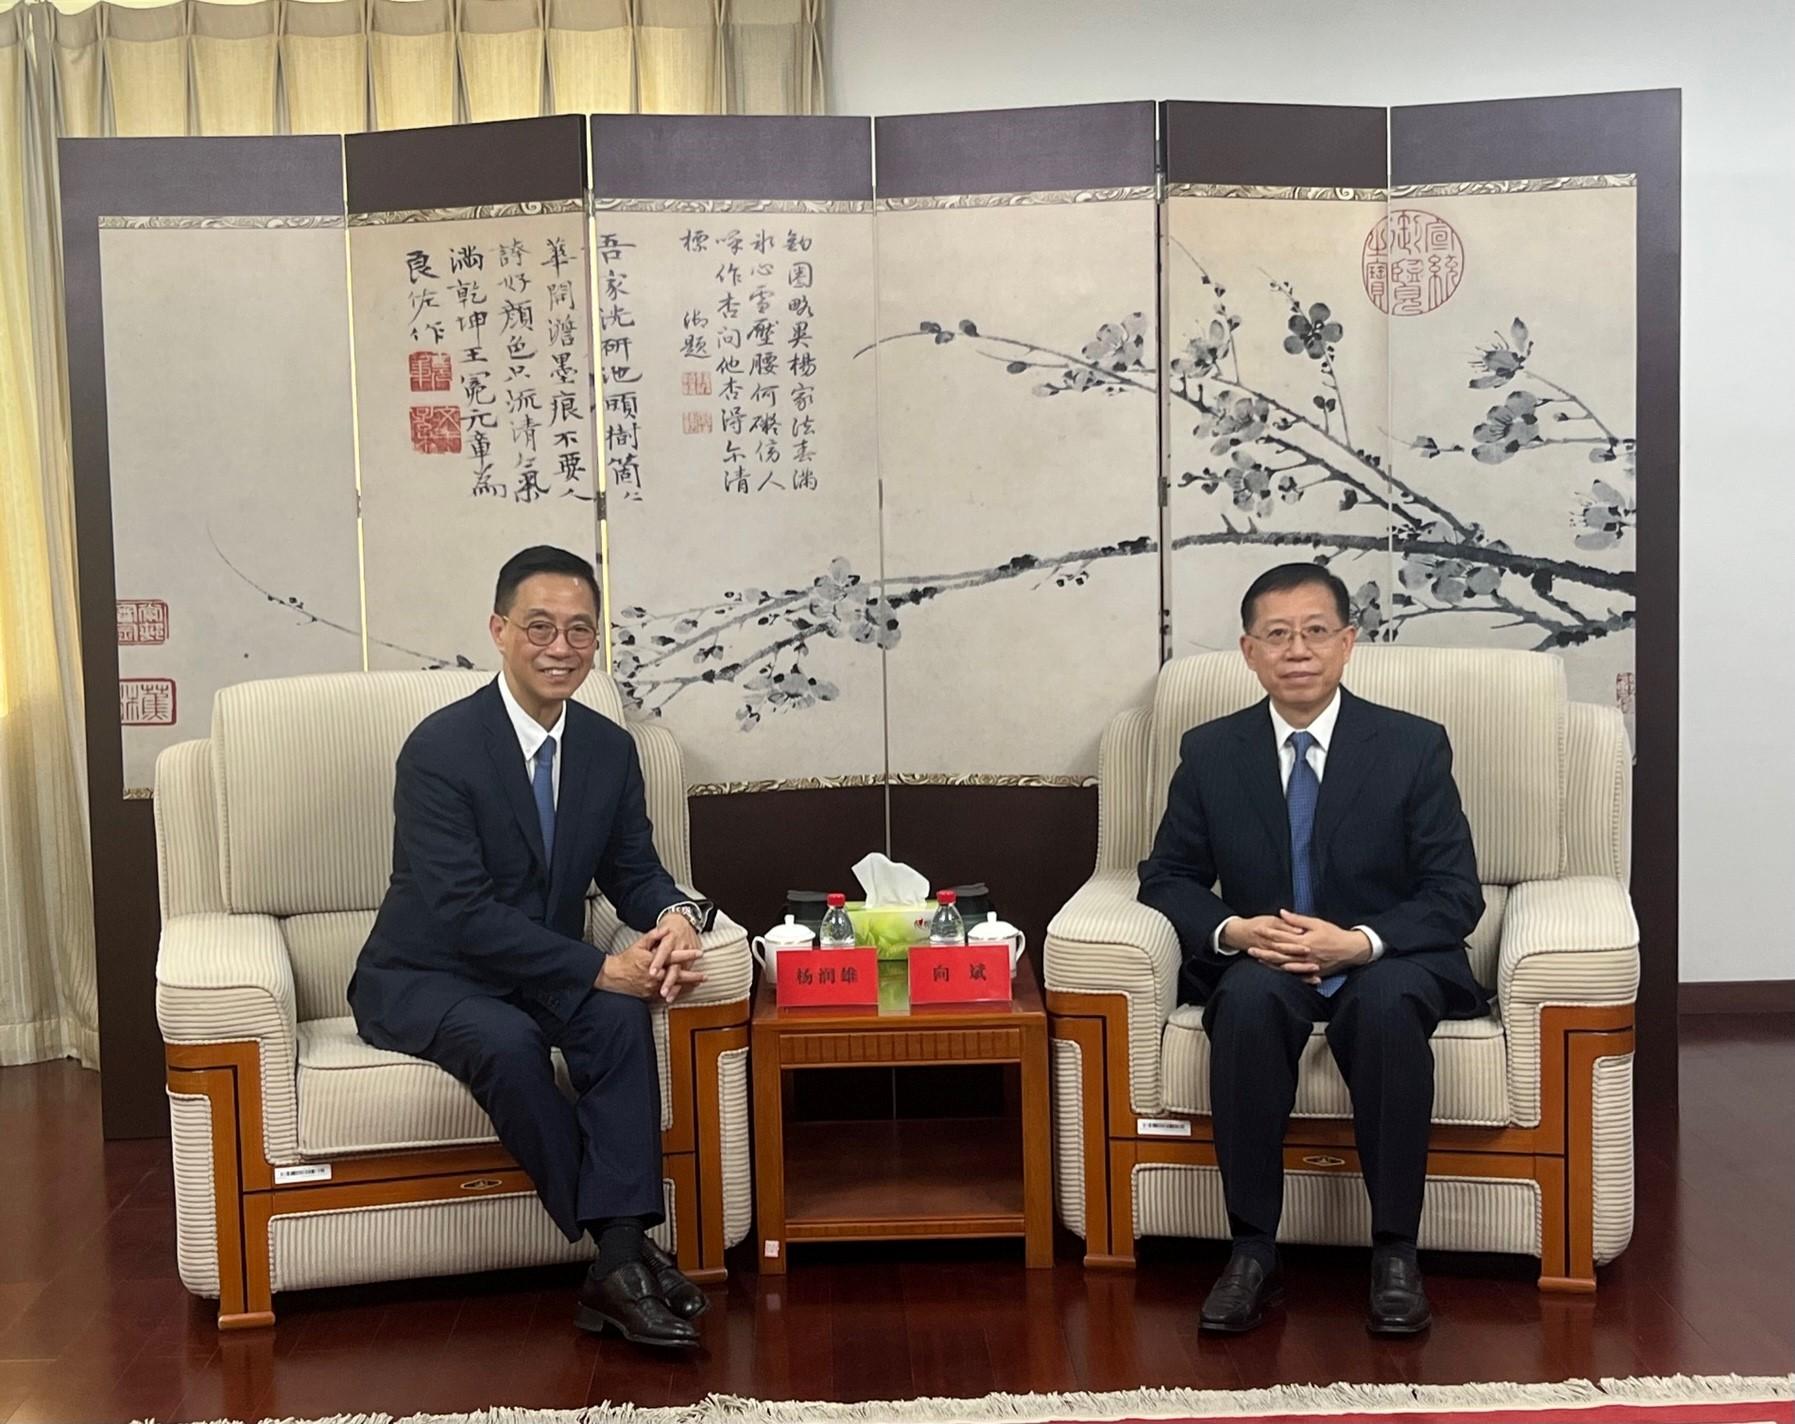 The Secretary for Culture, Sports and Tourism, Mr Kevin Yeung (left), today (November 17) met with House Committee Member of the Hong Kong and Macao Affairs Office of the State Council Mr Xiang Bing (right) in Beijing to brief him on the work of the Culture, Sports and Tourism Bureau and the relevant initiatives set out in the Policy Address.
